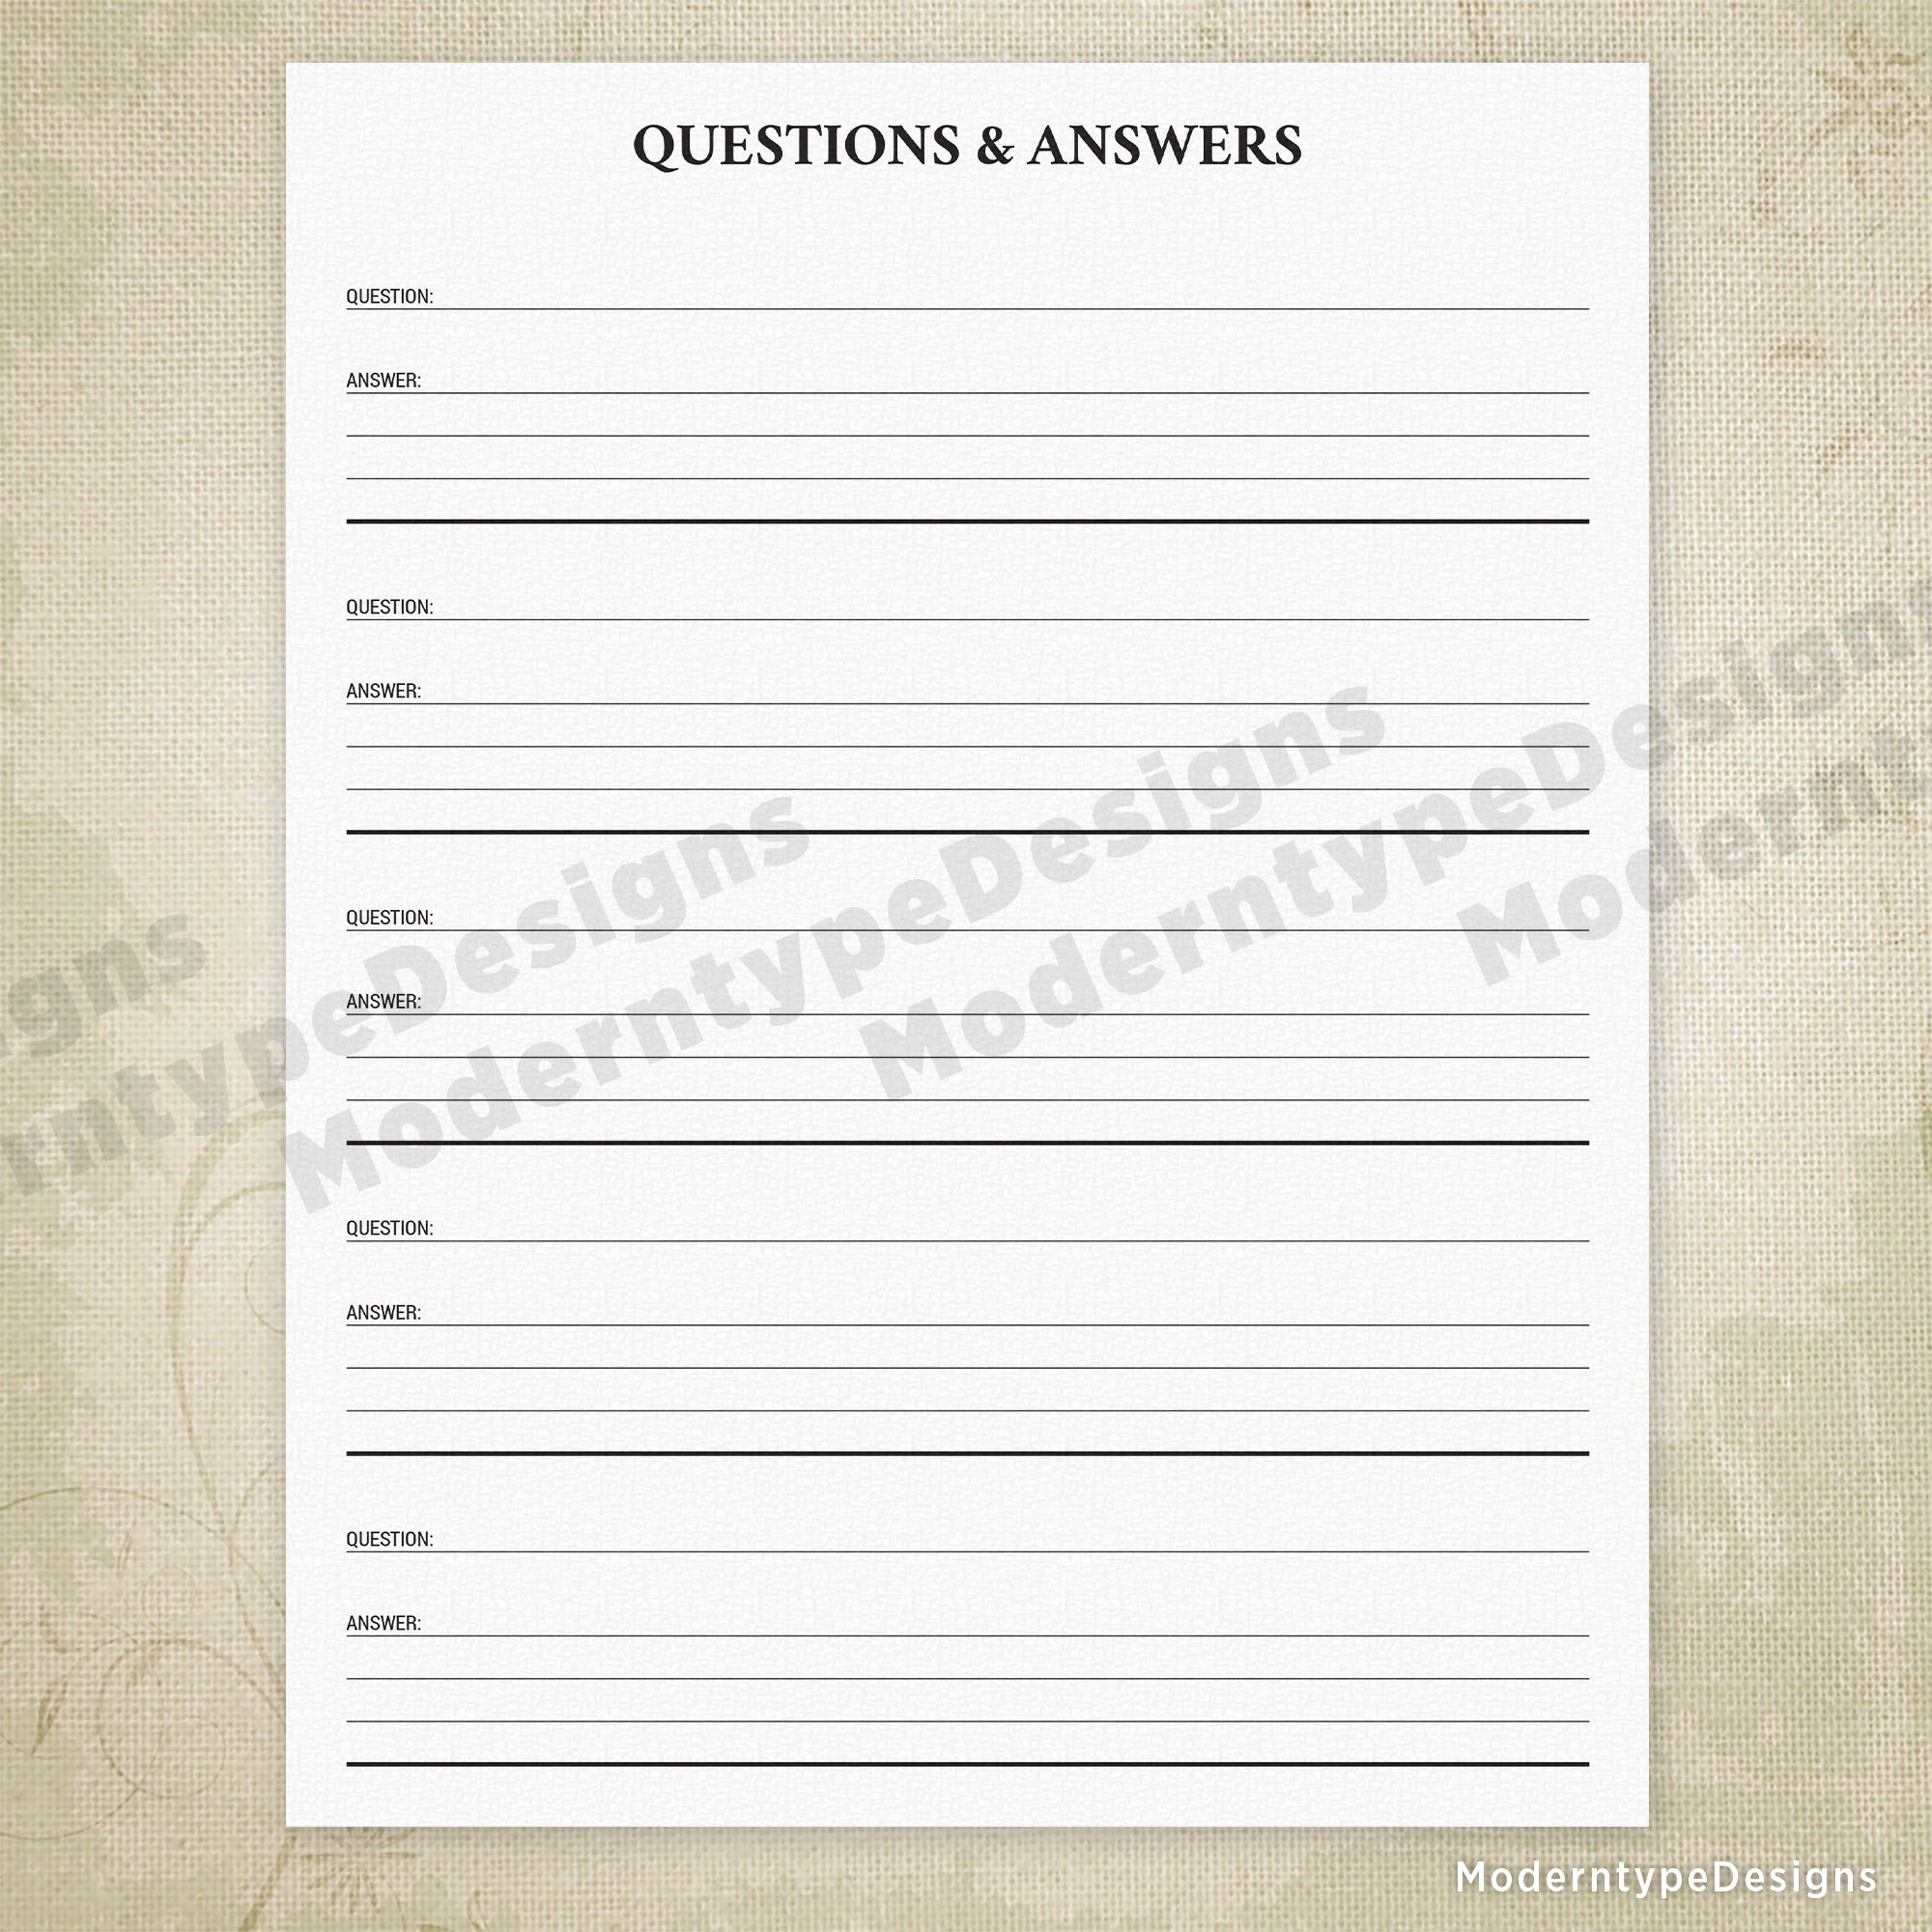 Questions & Answers Printable Form